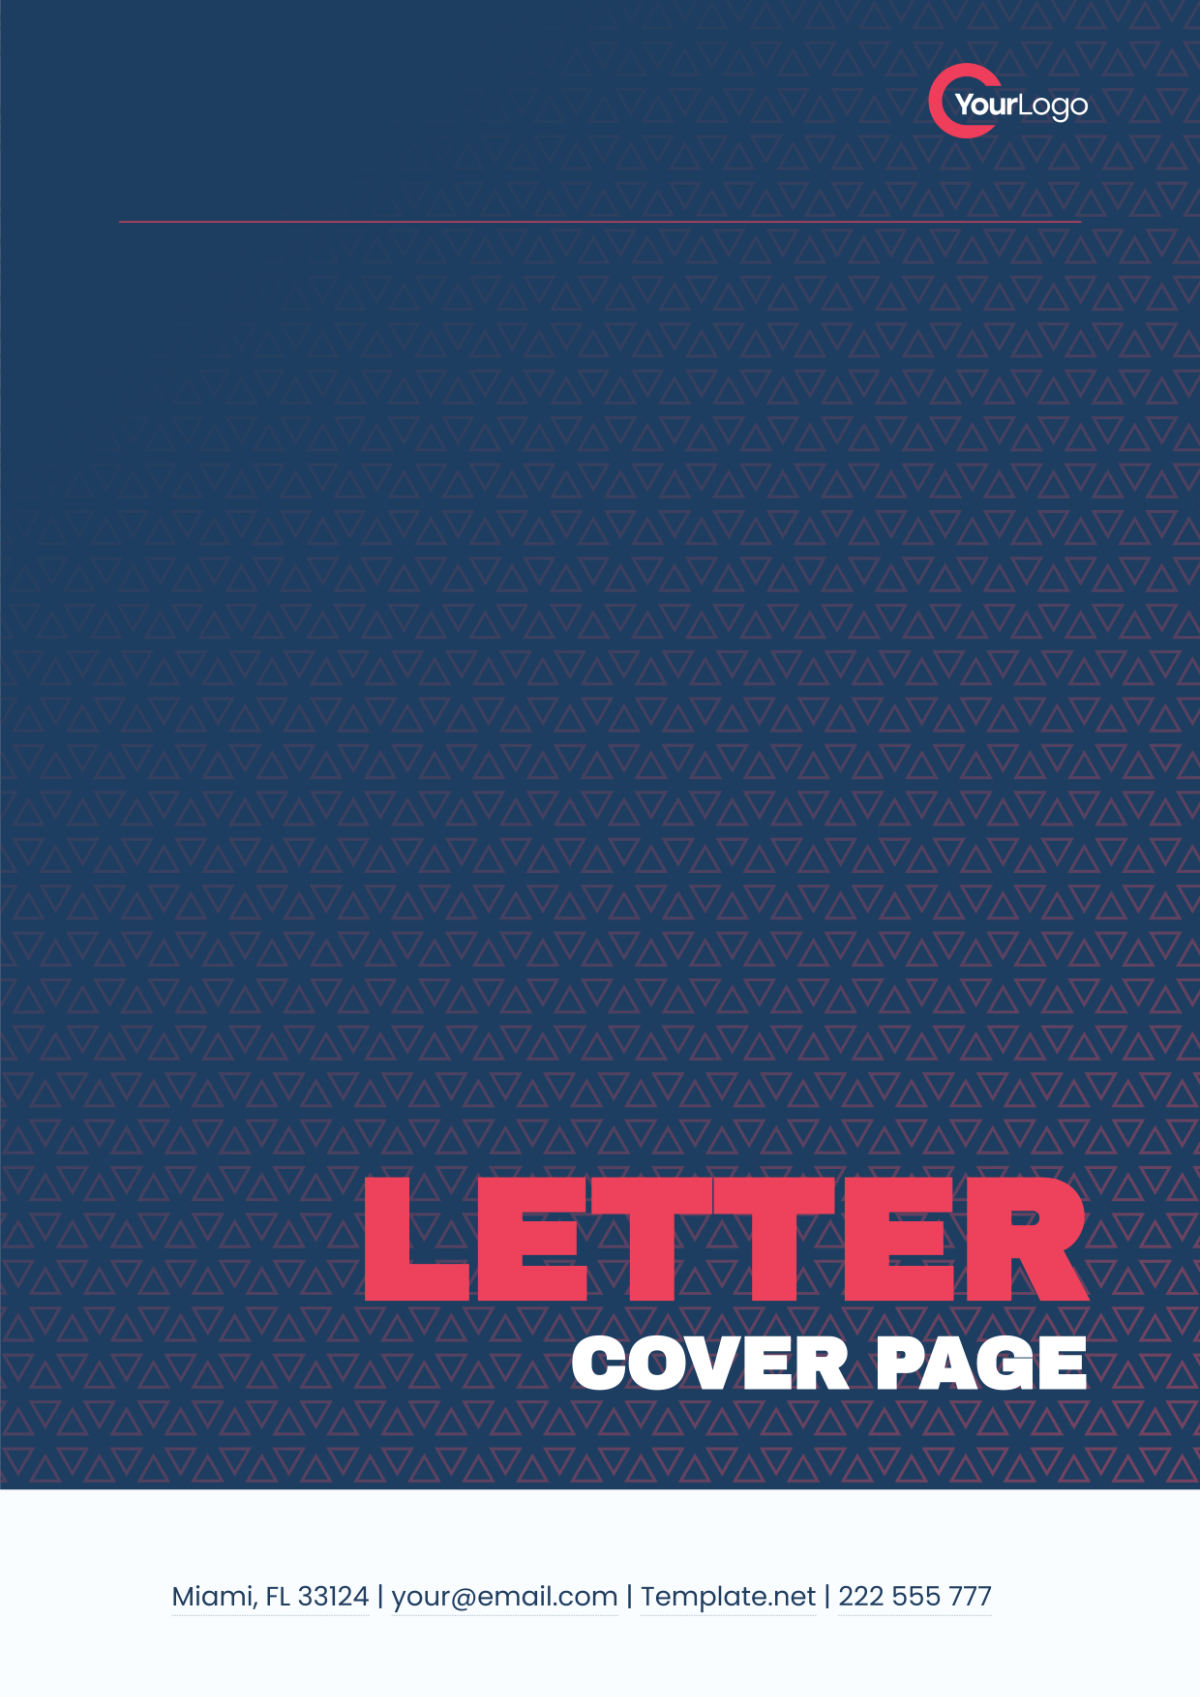 Letter Cover Page Logo Template